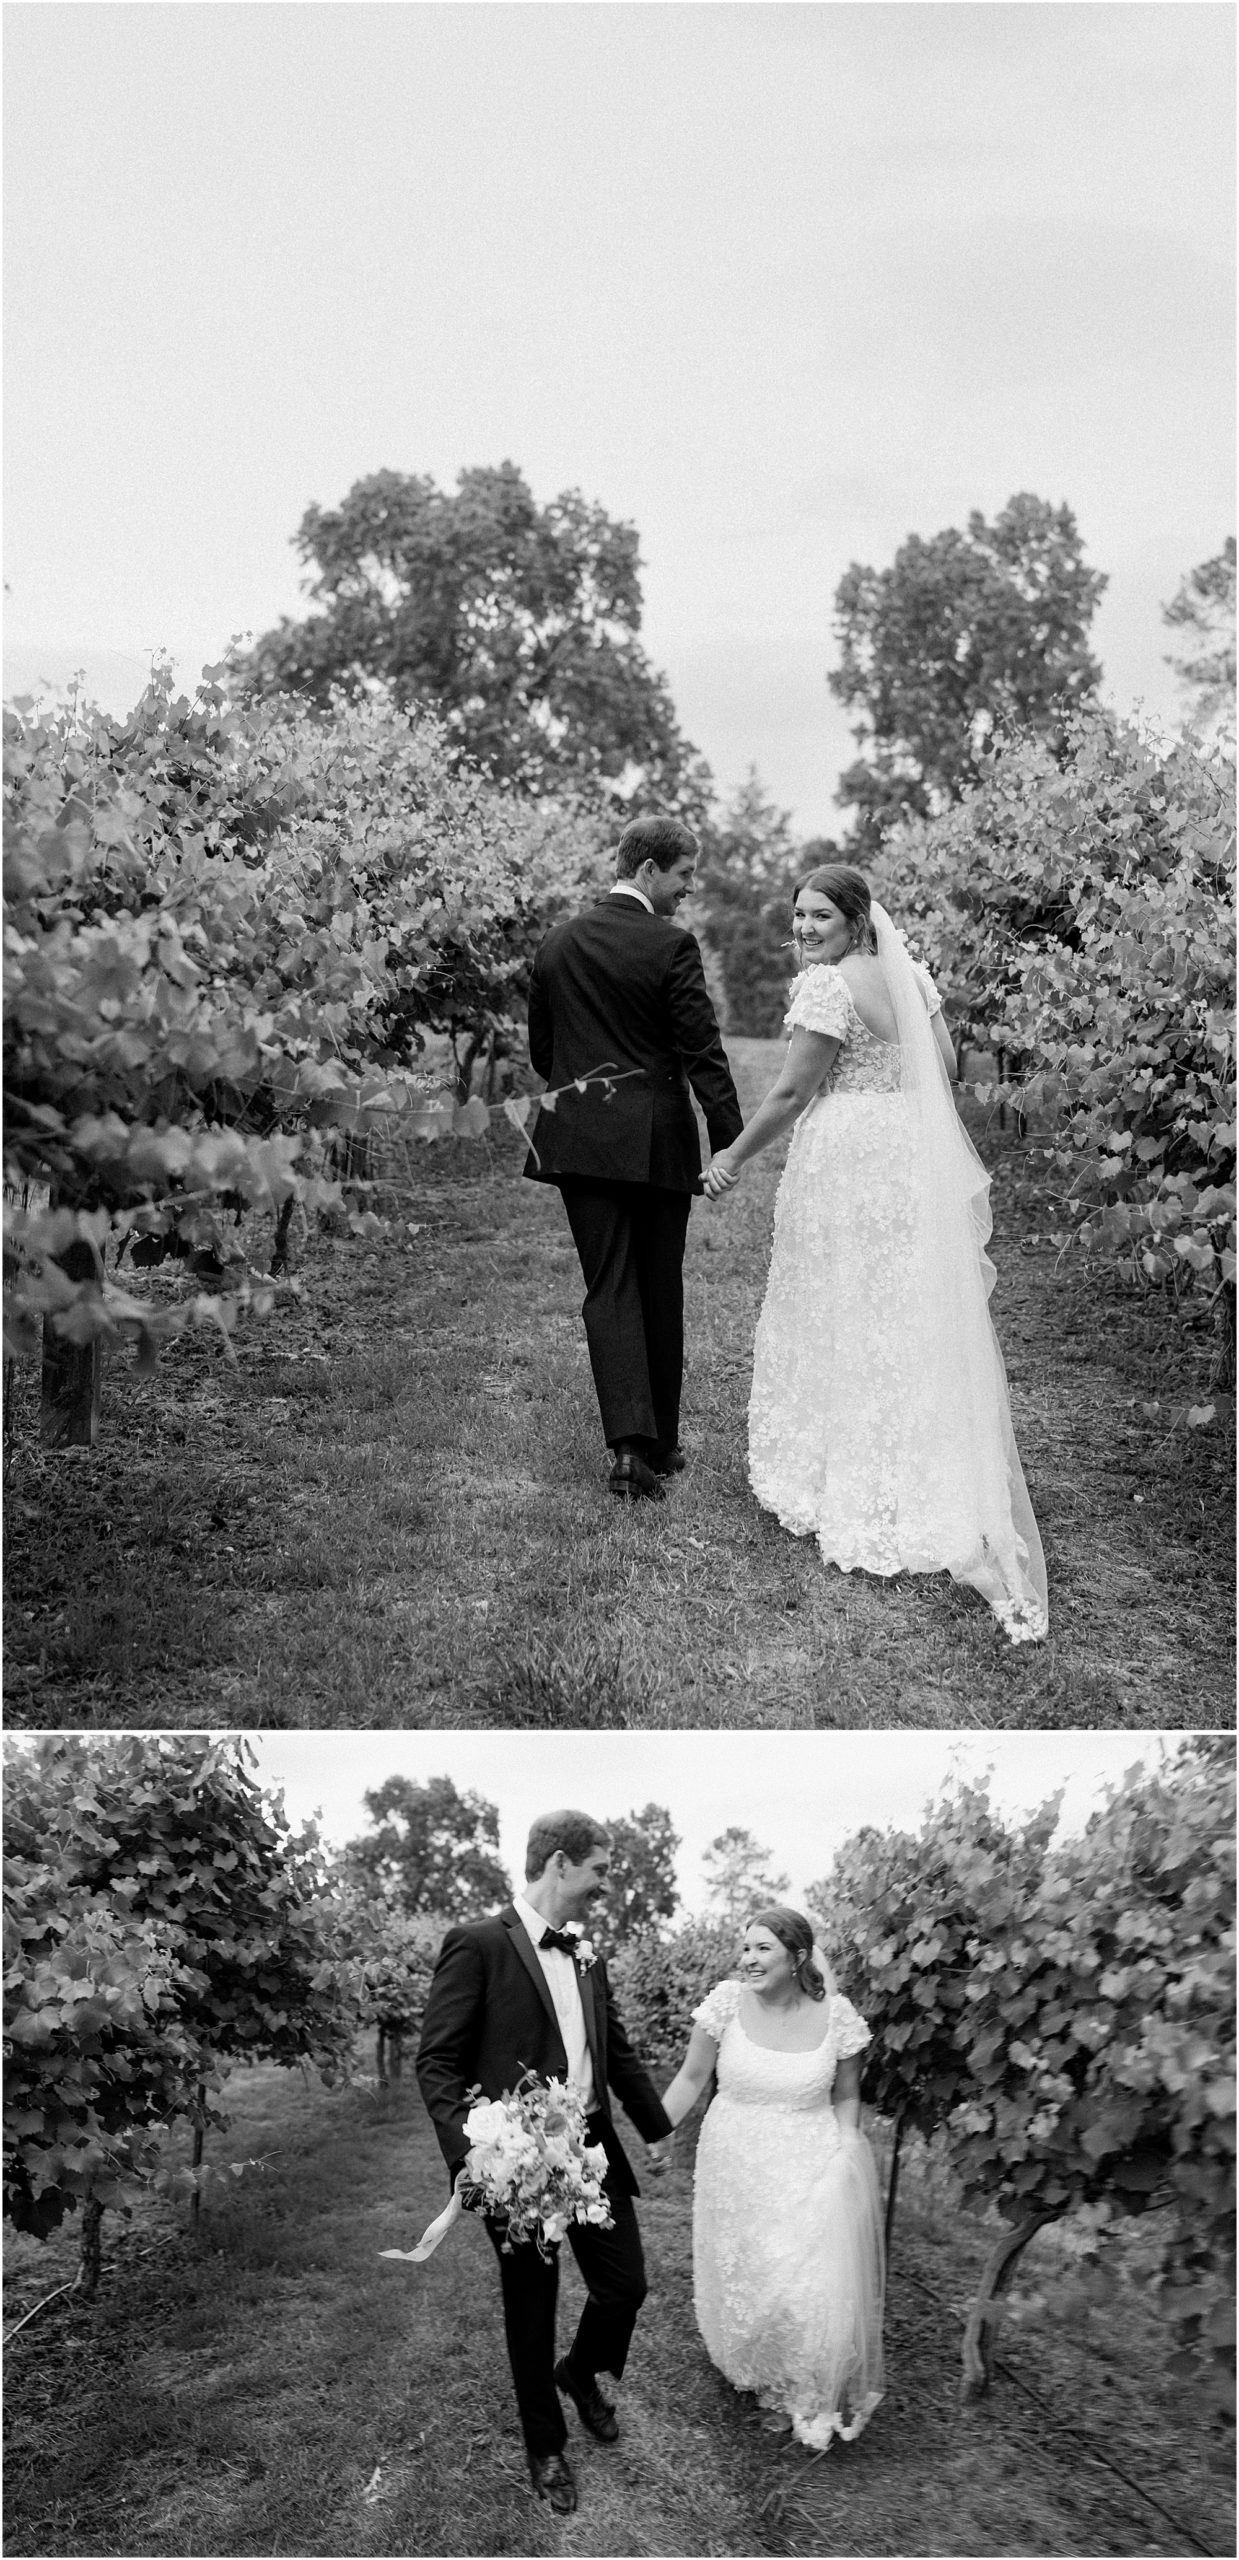 Bride and groom walking through the family vineyard together. Black and white blurry.